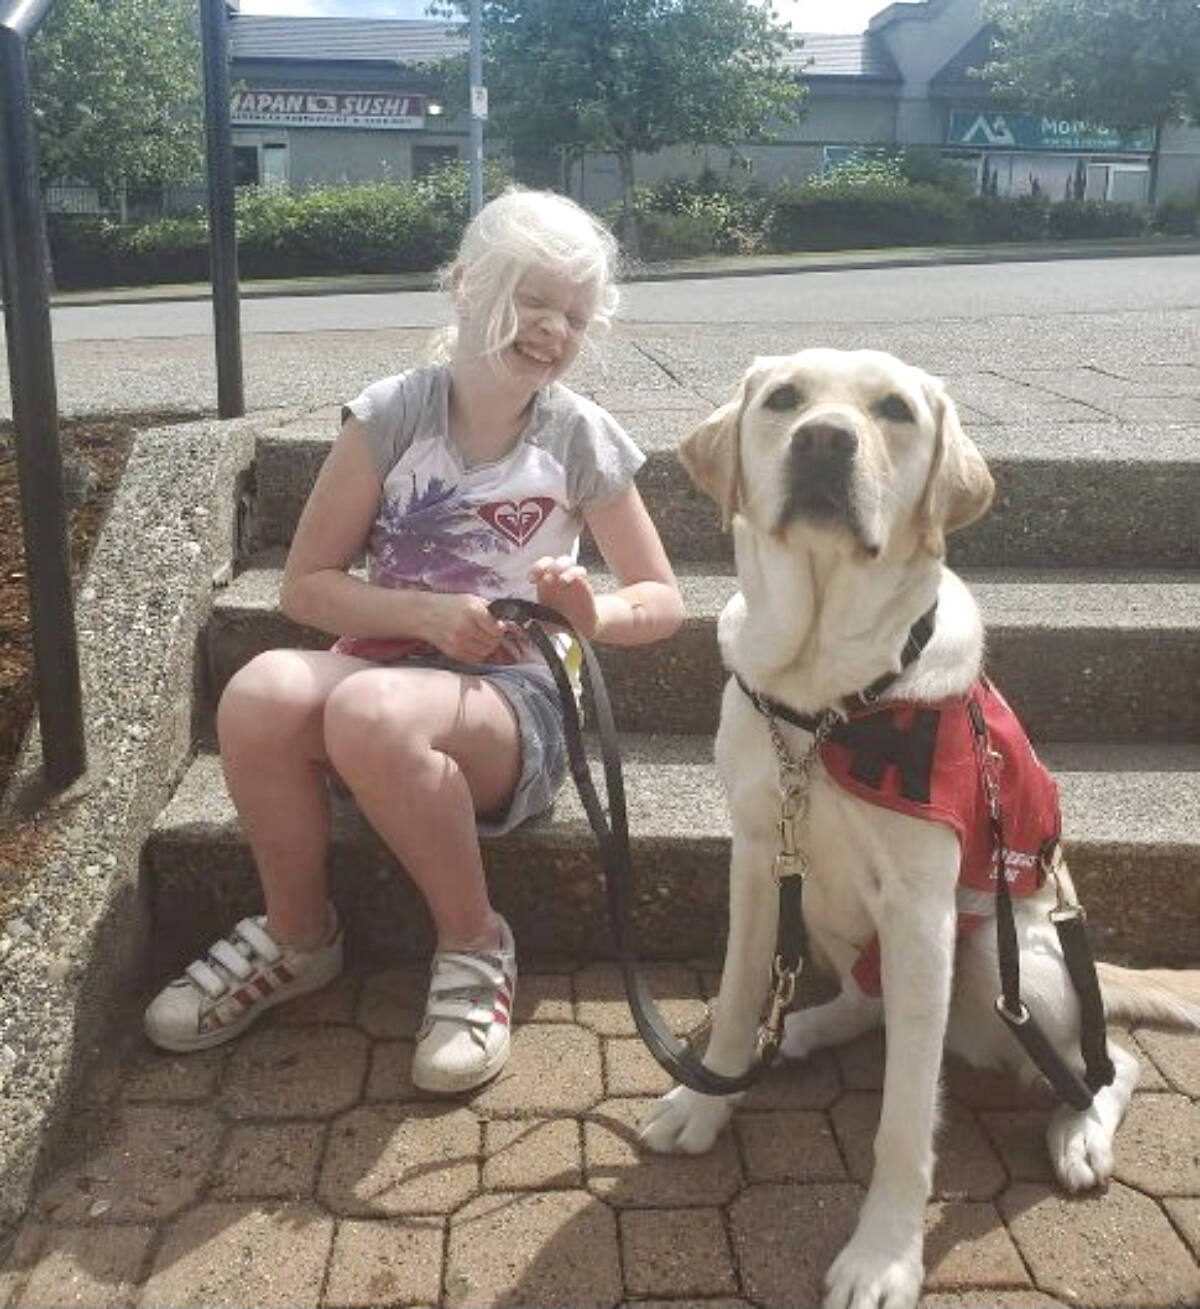 Sophia, seen here with her service dog Fresca, will get to go with her fellow Grade 6 students on a field trip to the water park at Cultus Lake after the Langley School District rescinded a decision excluding the special needs student citing ‘WorkSafe’ issues. (Special to Langley Advance Times)